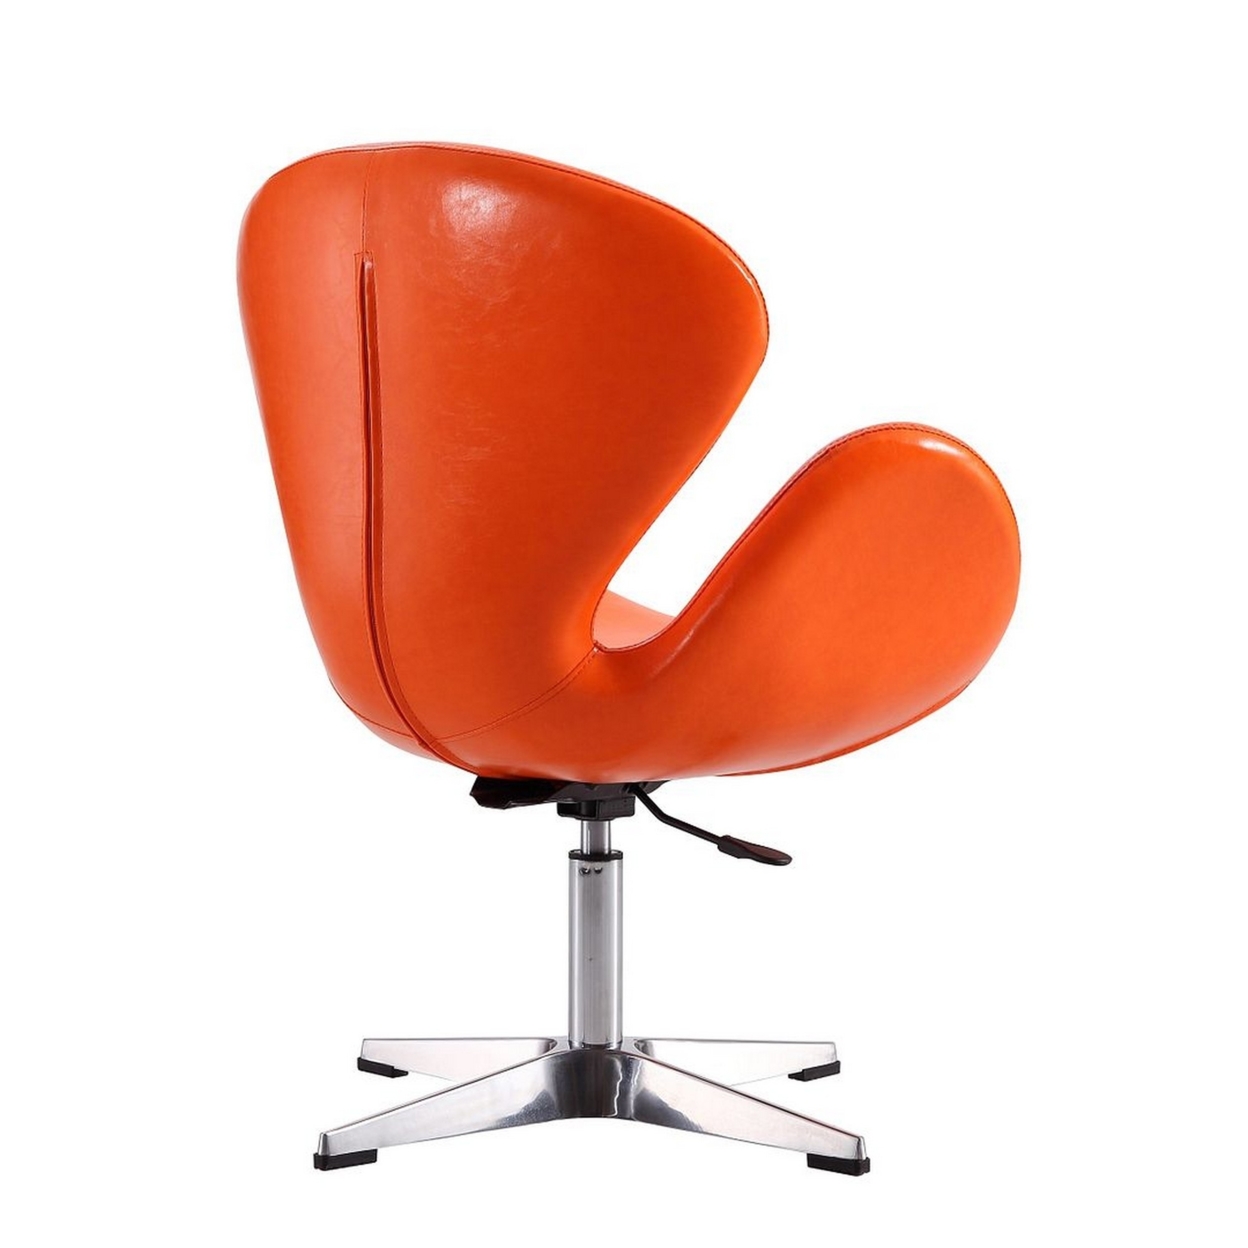 Manhattan Comfort Raspberry Tangerine and Polished Chrome Faux Leather Adjustable Swivel Chair